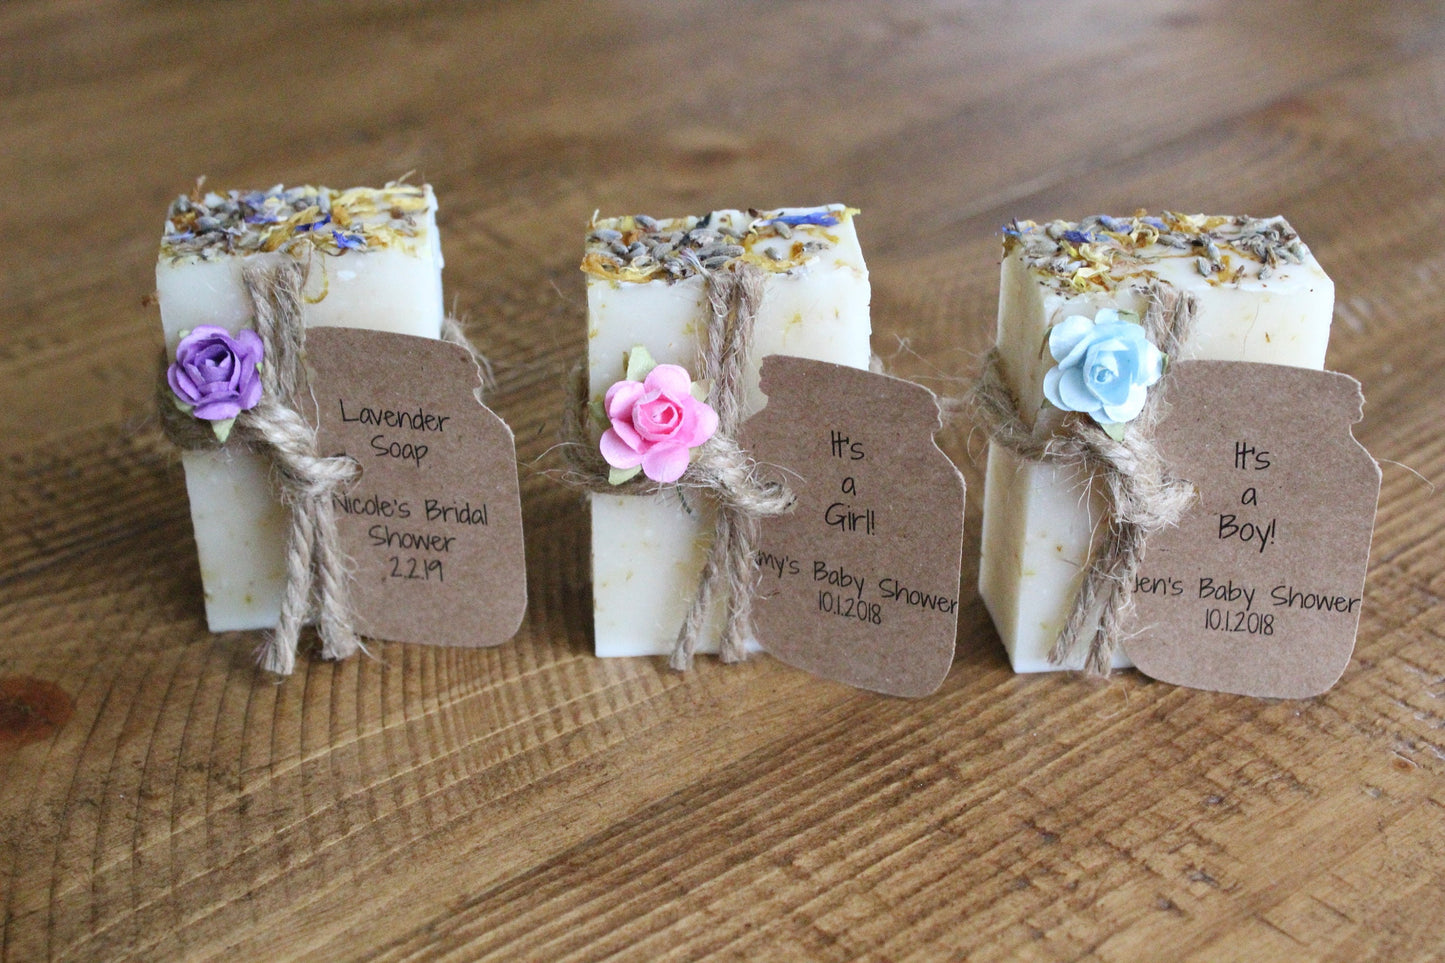 Bridal Shower Favors Personalized Wedding Favors Bridal Shower Soap Favors Soap Favors Lavender Wedding Favors Bridal Shower Favors Soap